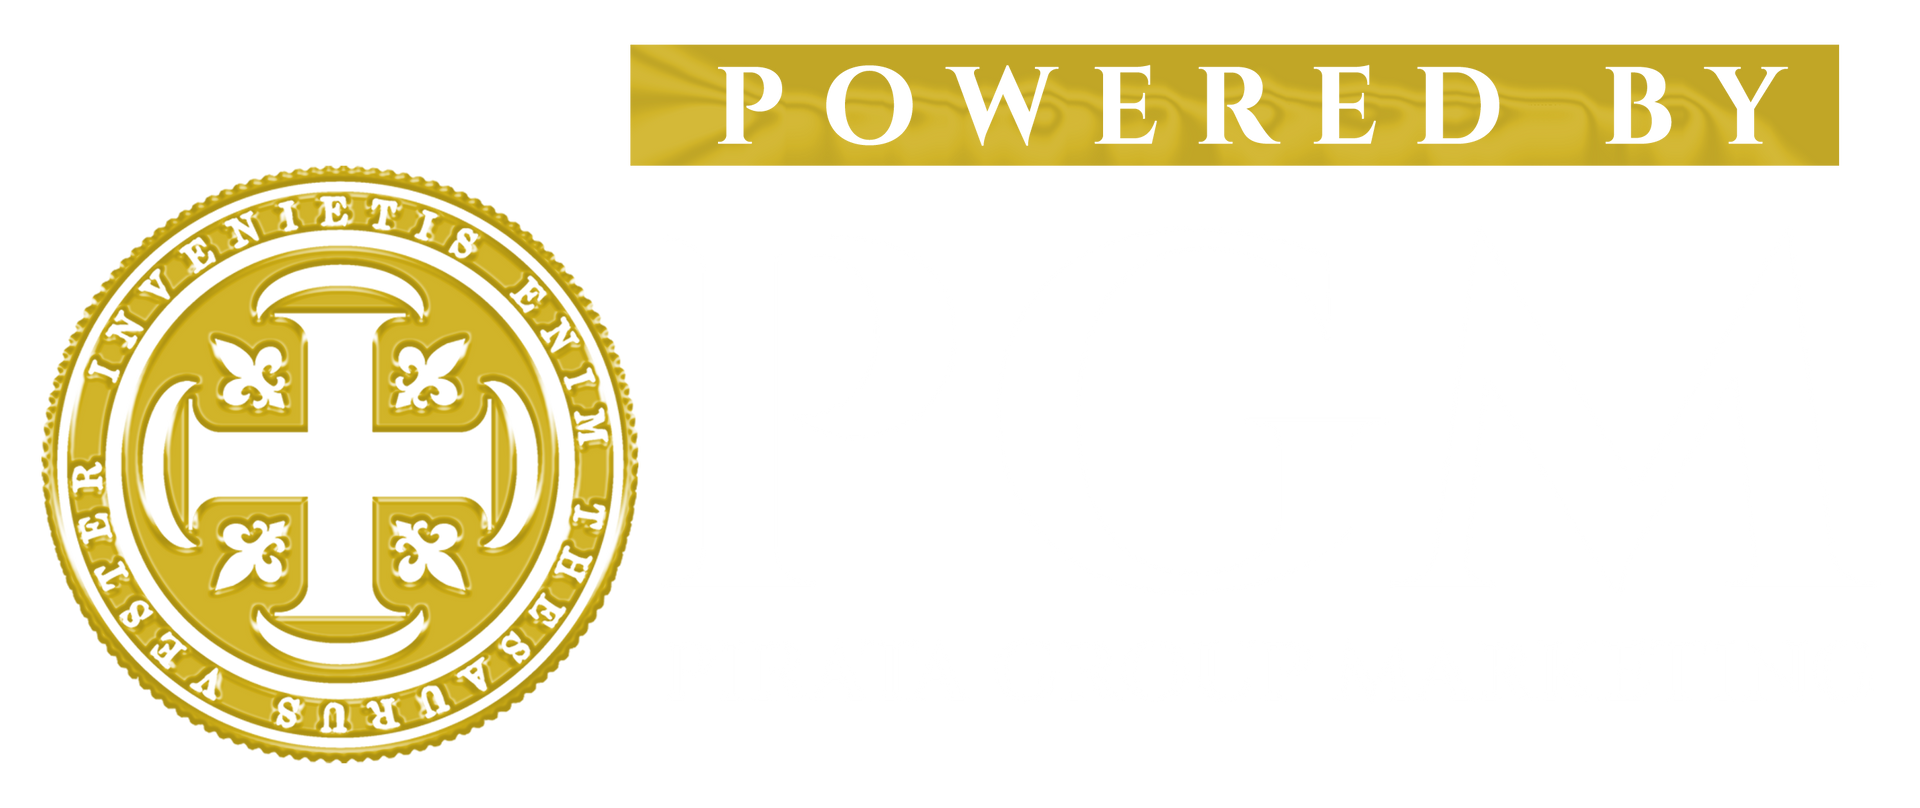 a logo that says powered by PGM on it